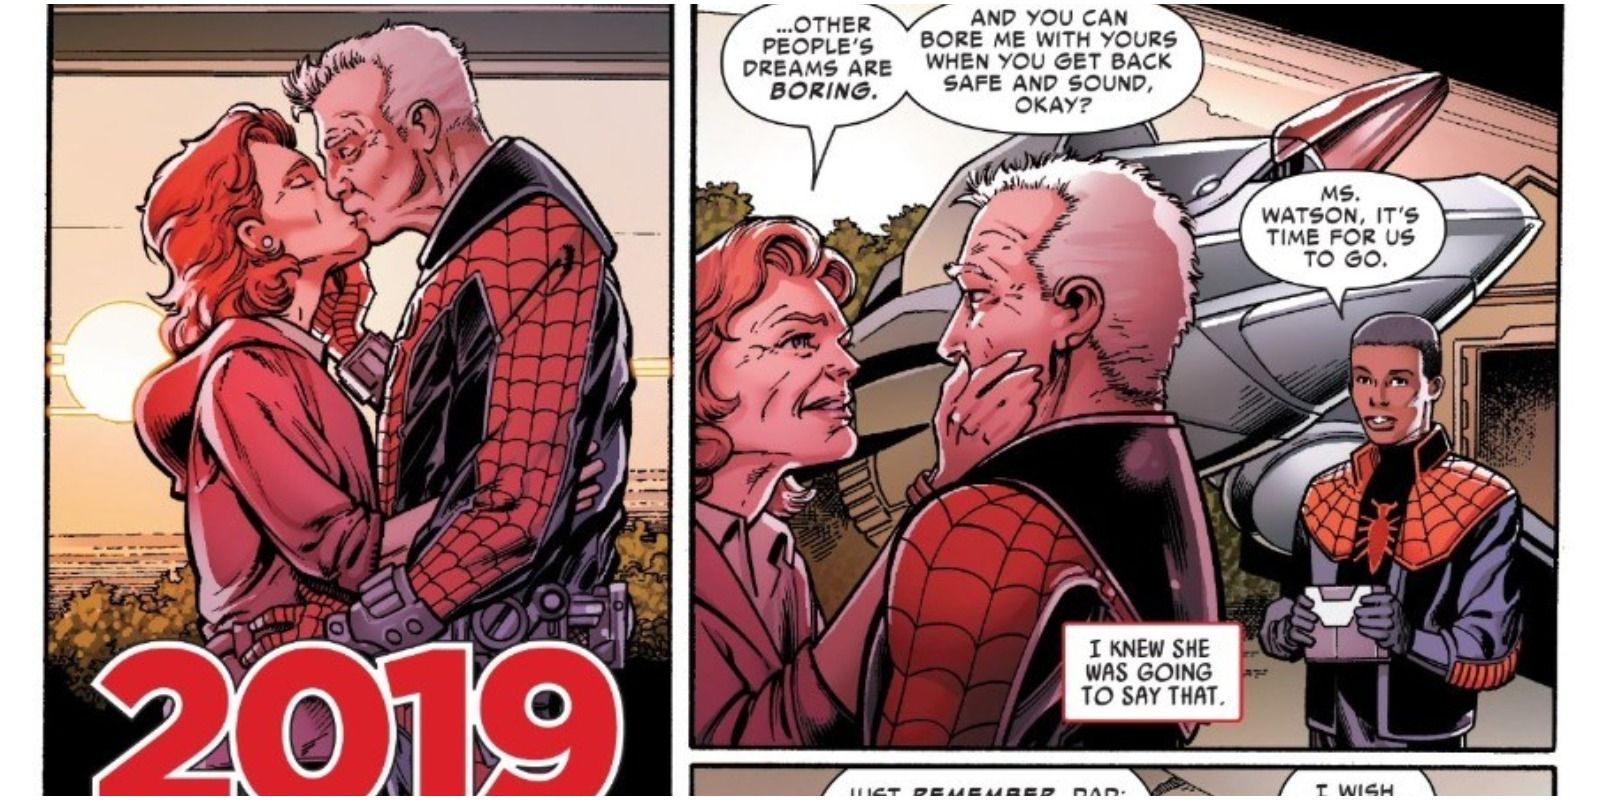 Spider-Man: Life Story - 5 Things We Love About The Comic (& 5 We Don't)